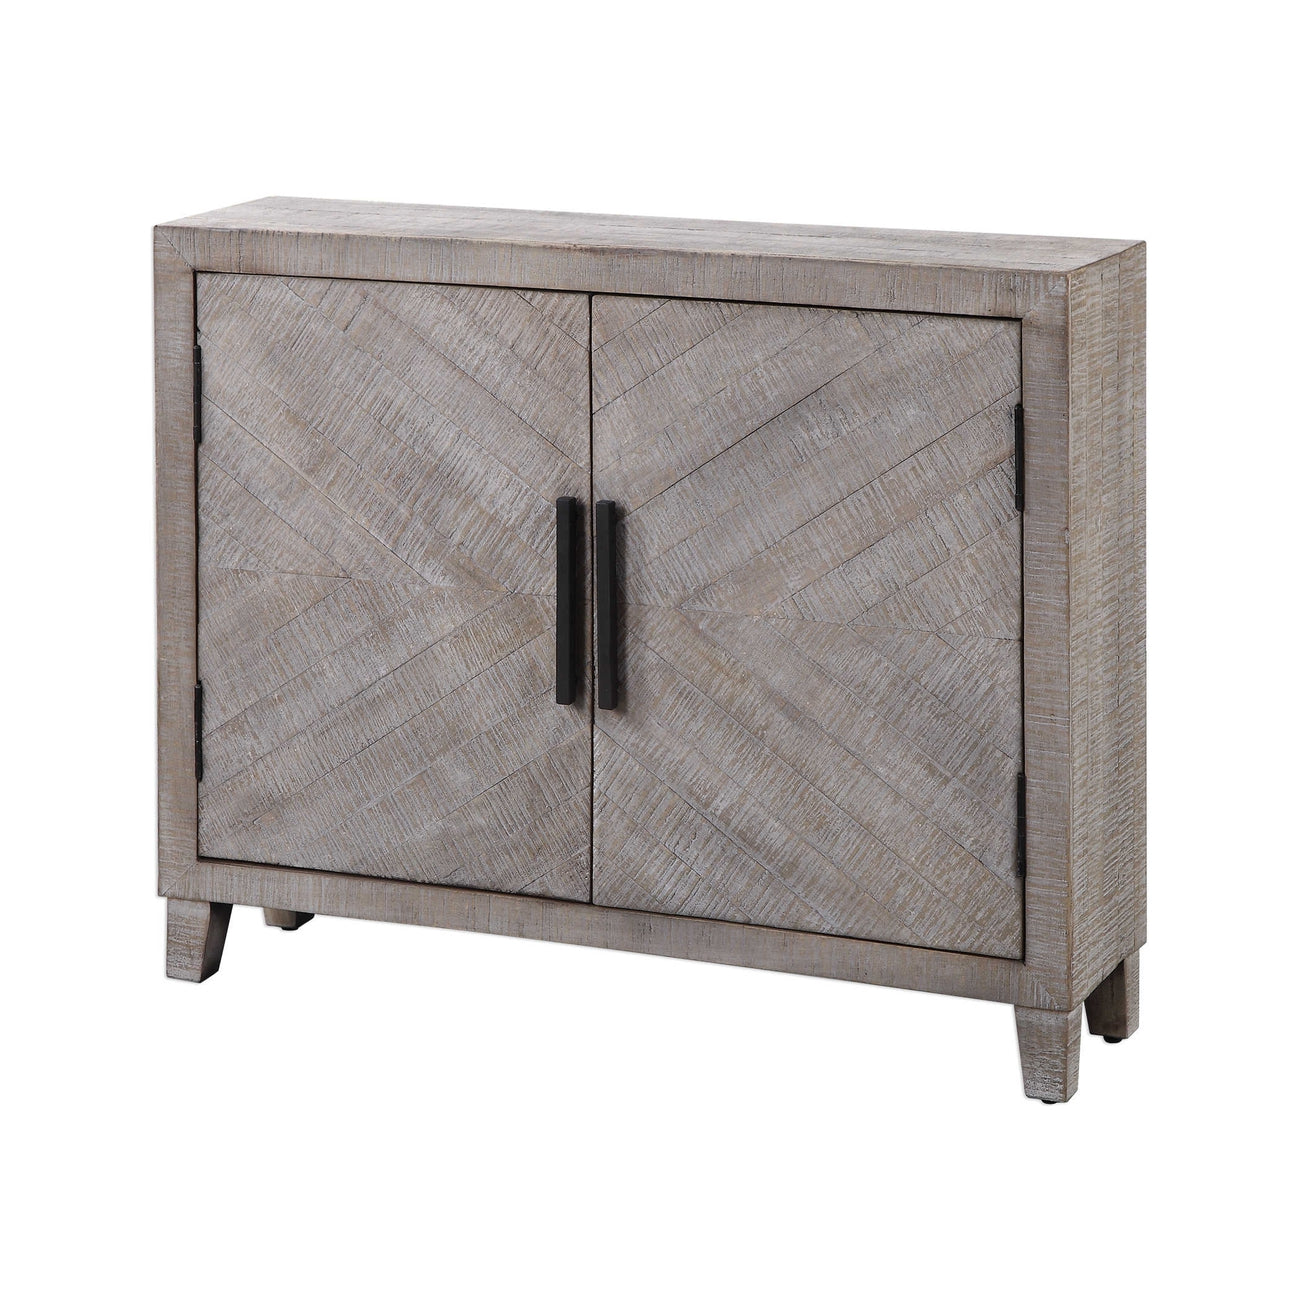 Uttermost, Adalind White Washed Accent Cabinet